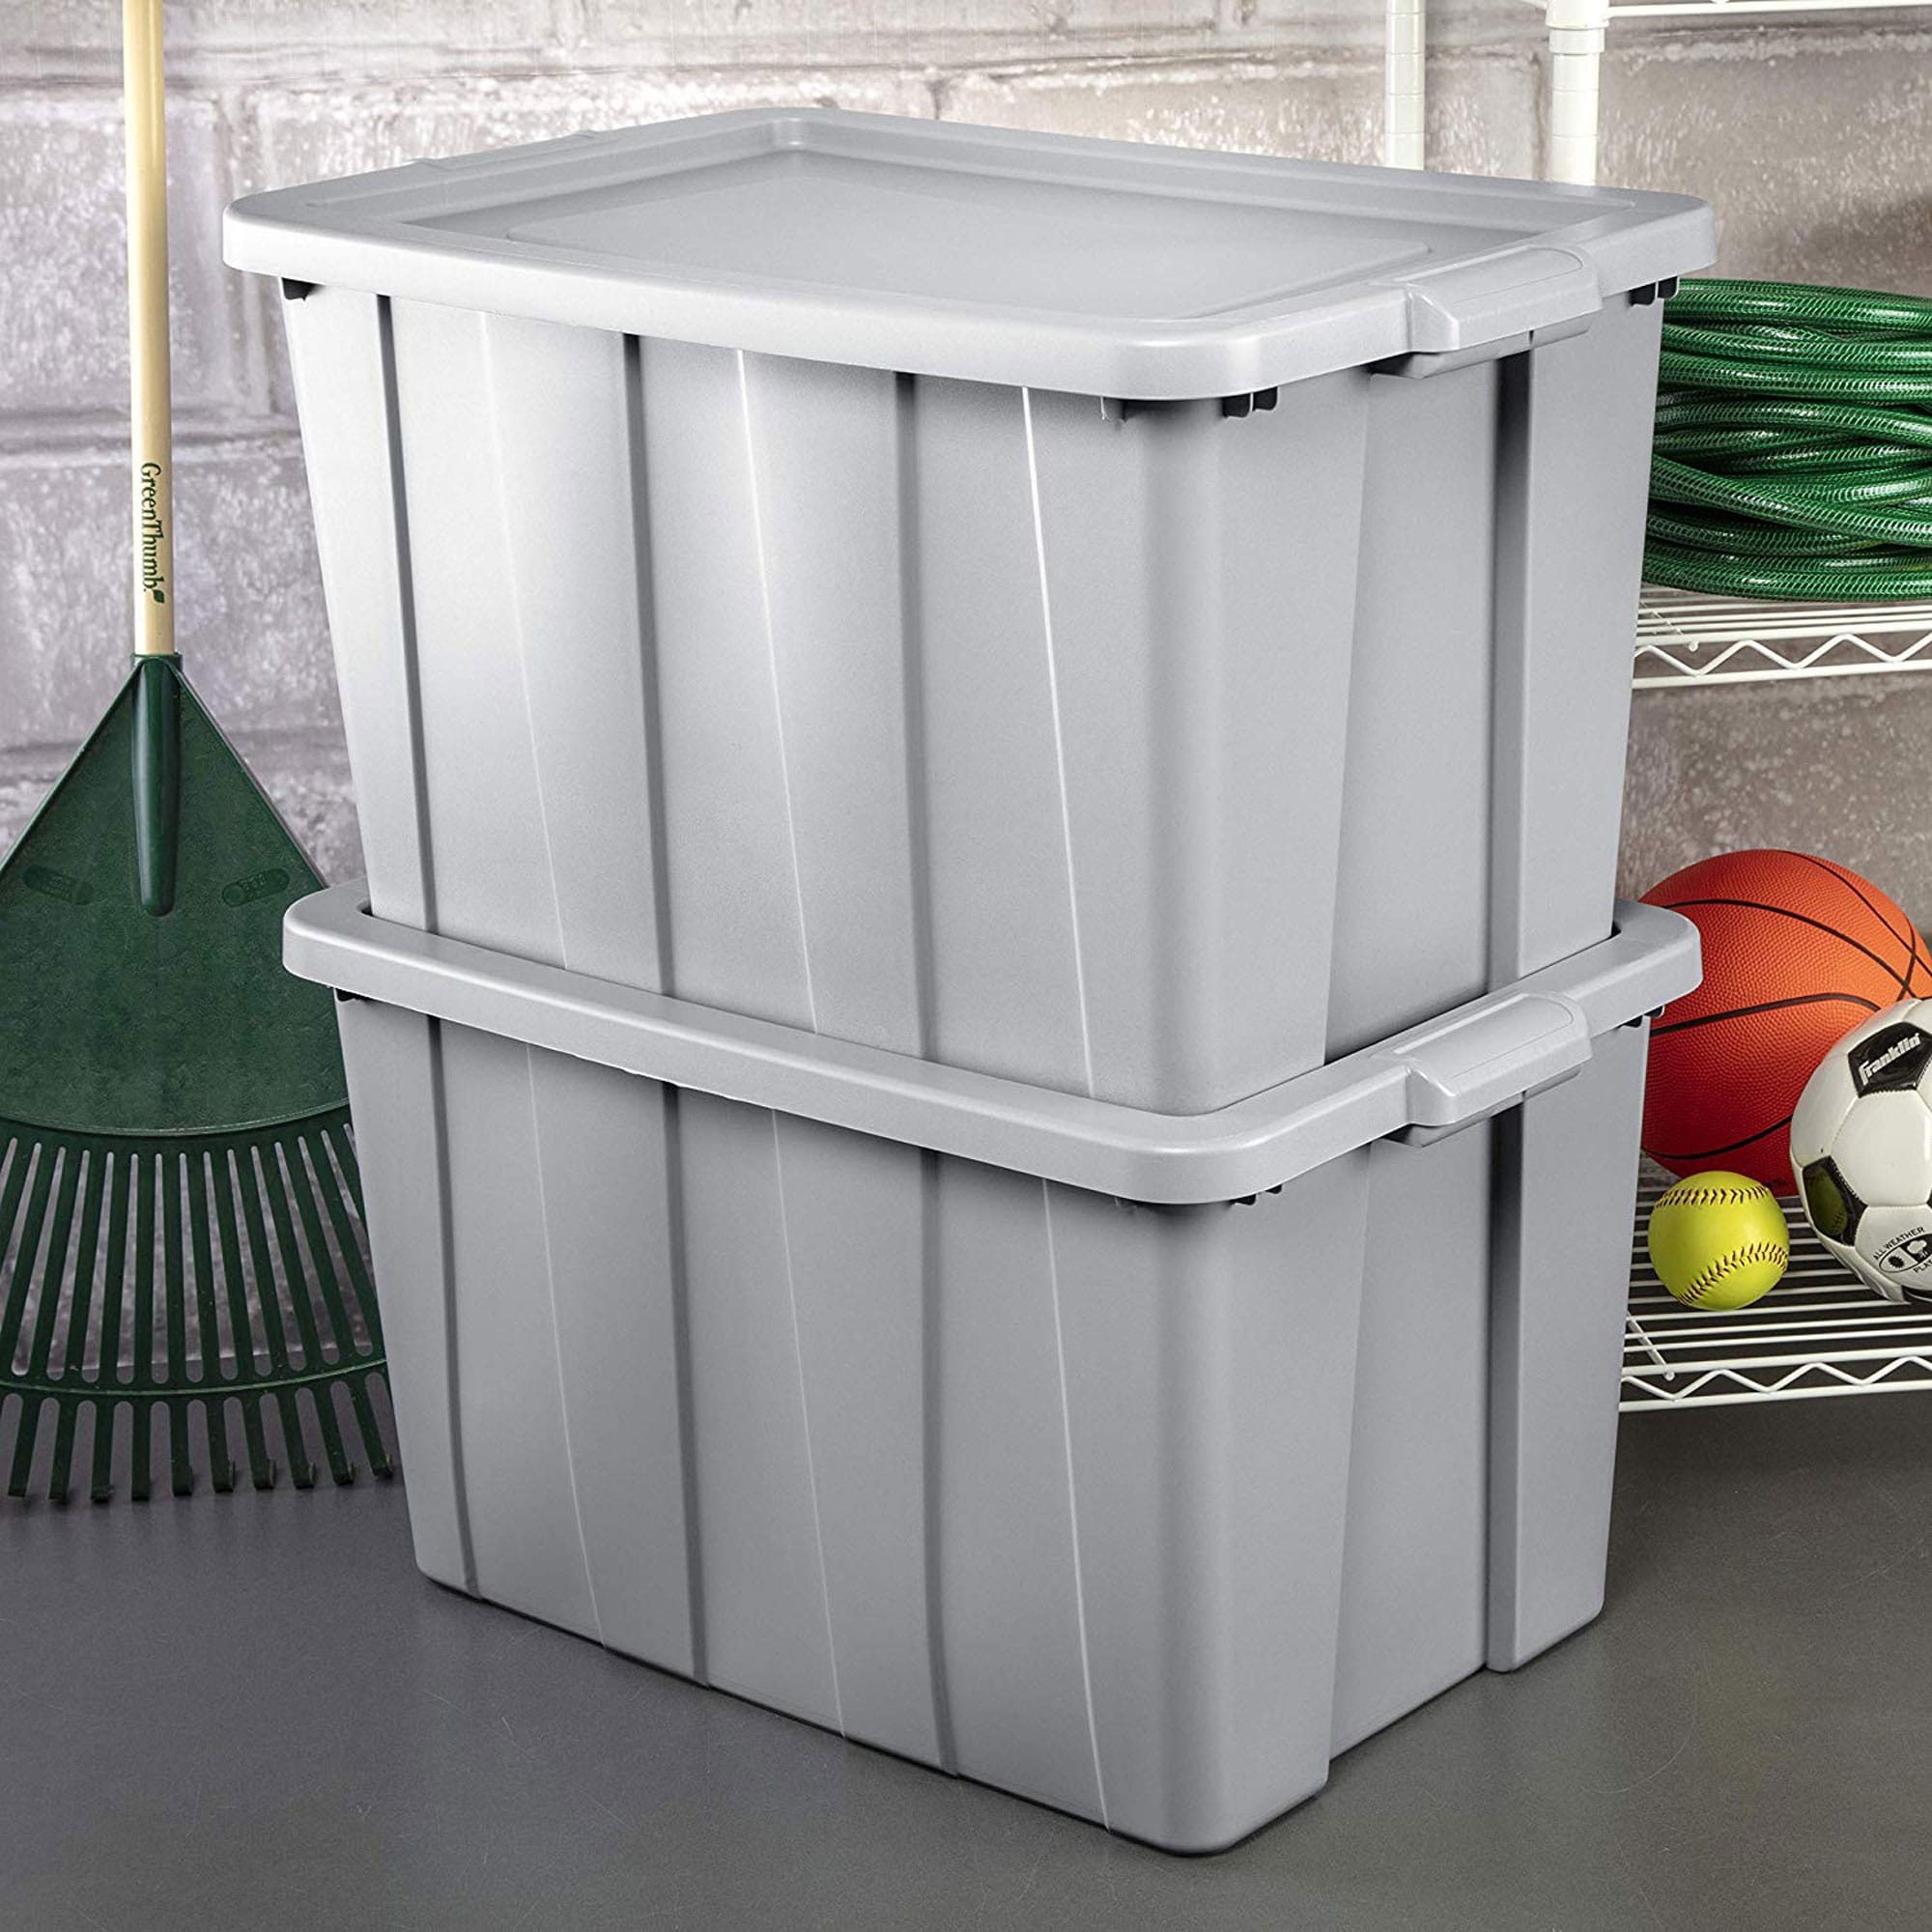 https://ak1.ostkcdn.com/images/products/is/images/direct/1e095cd2df167a3af93ad5f0a3fd67f99684f30d/Sterilite-Tuff1-30-Gallon-Plastic-Storage-Tote-Container-Bin-with-Lid-%2812-Pack%29.jpg